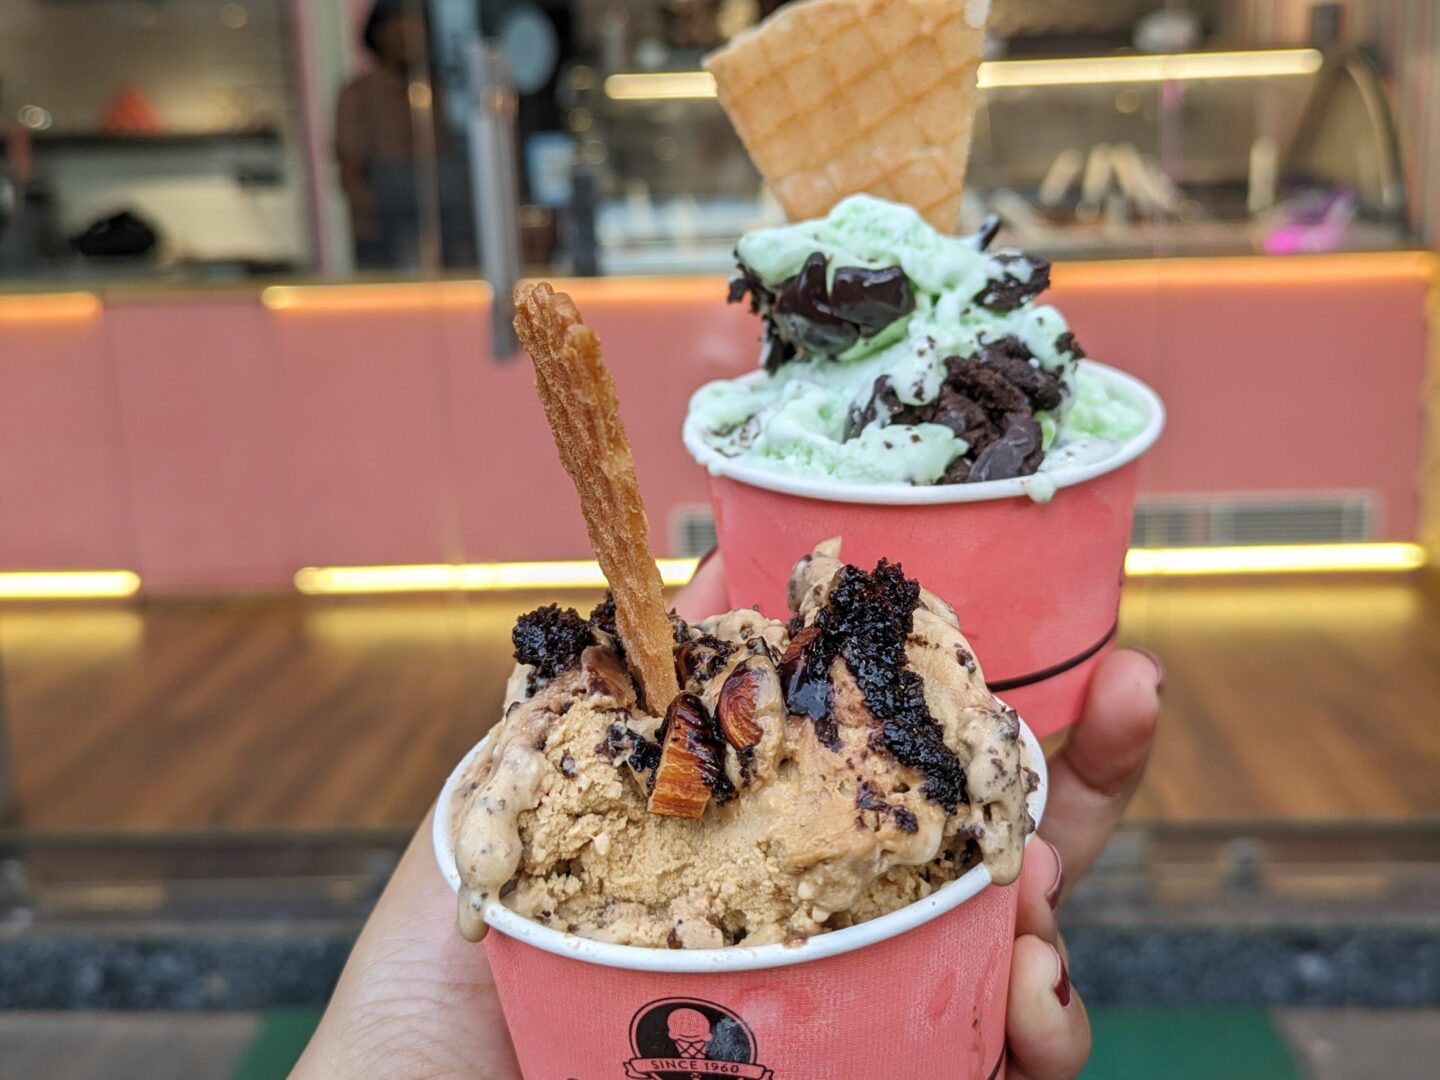 Here’s the best gelato in Goa: small scoop or large?